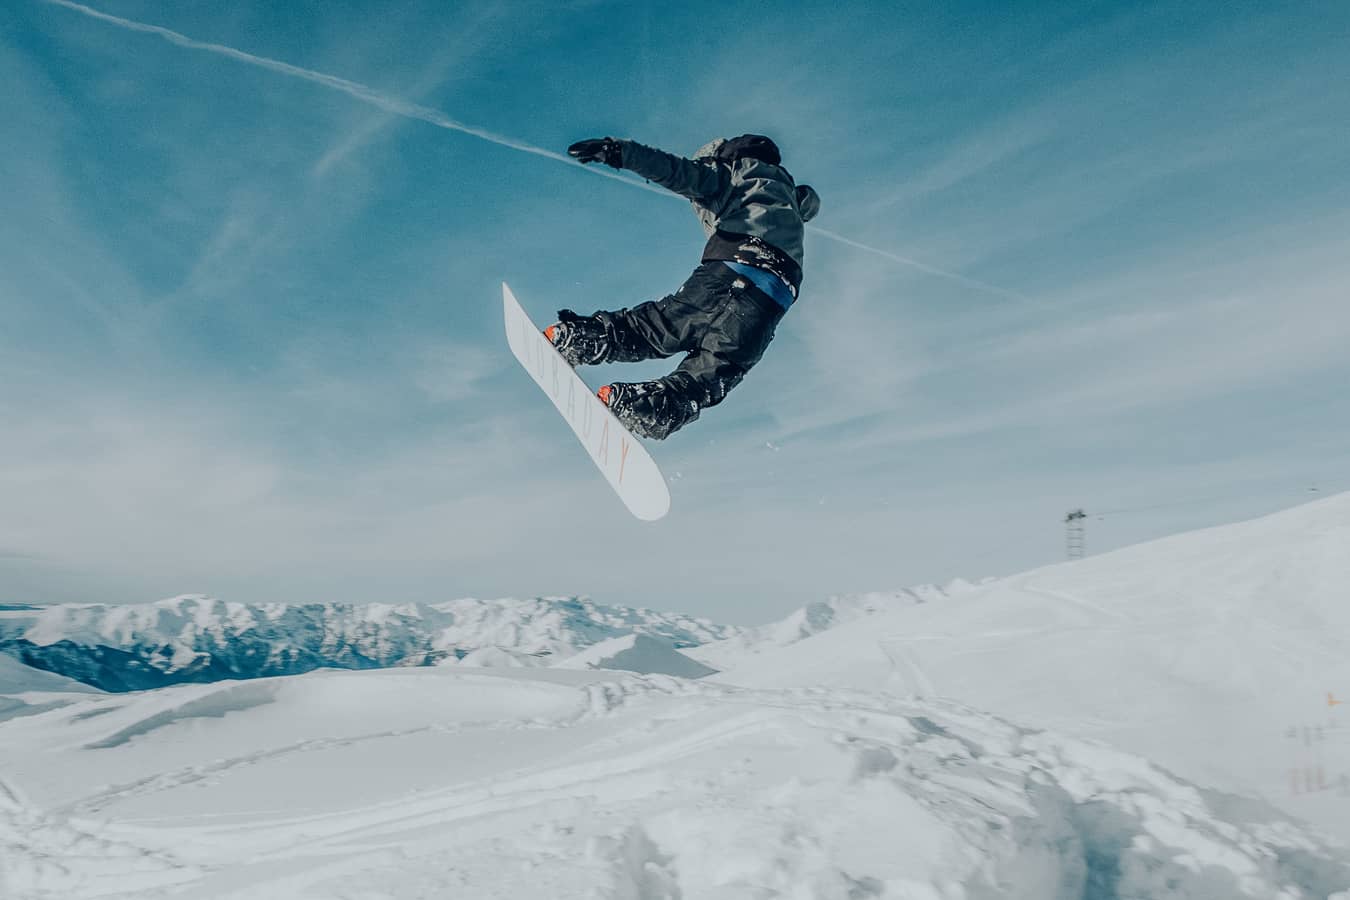 A snowboarder in the air